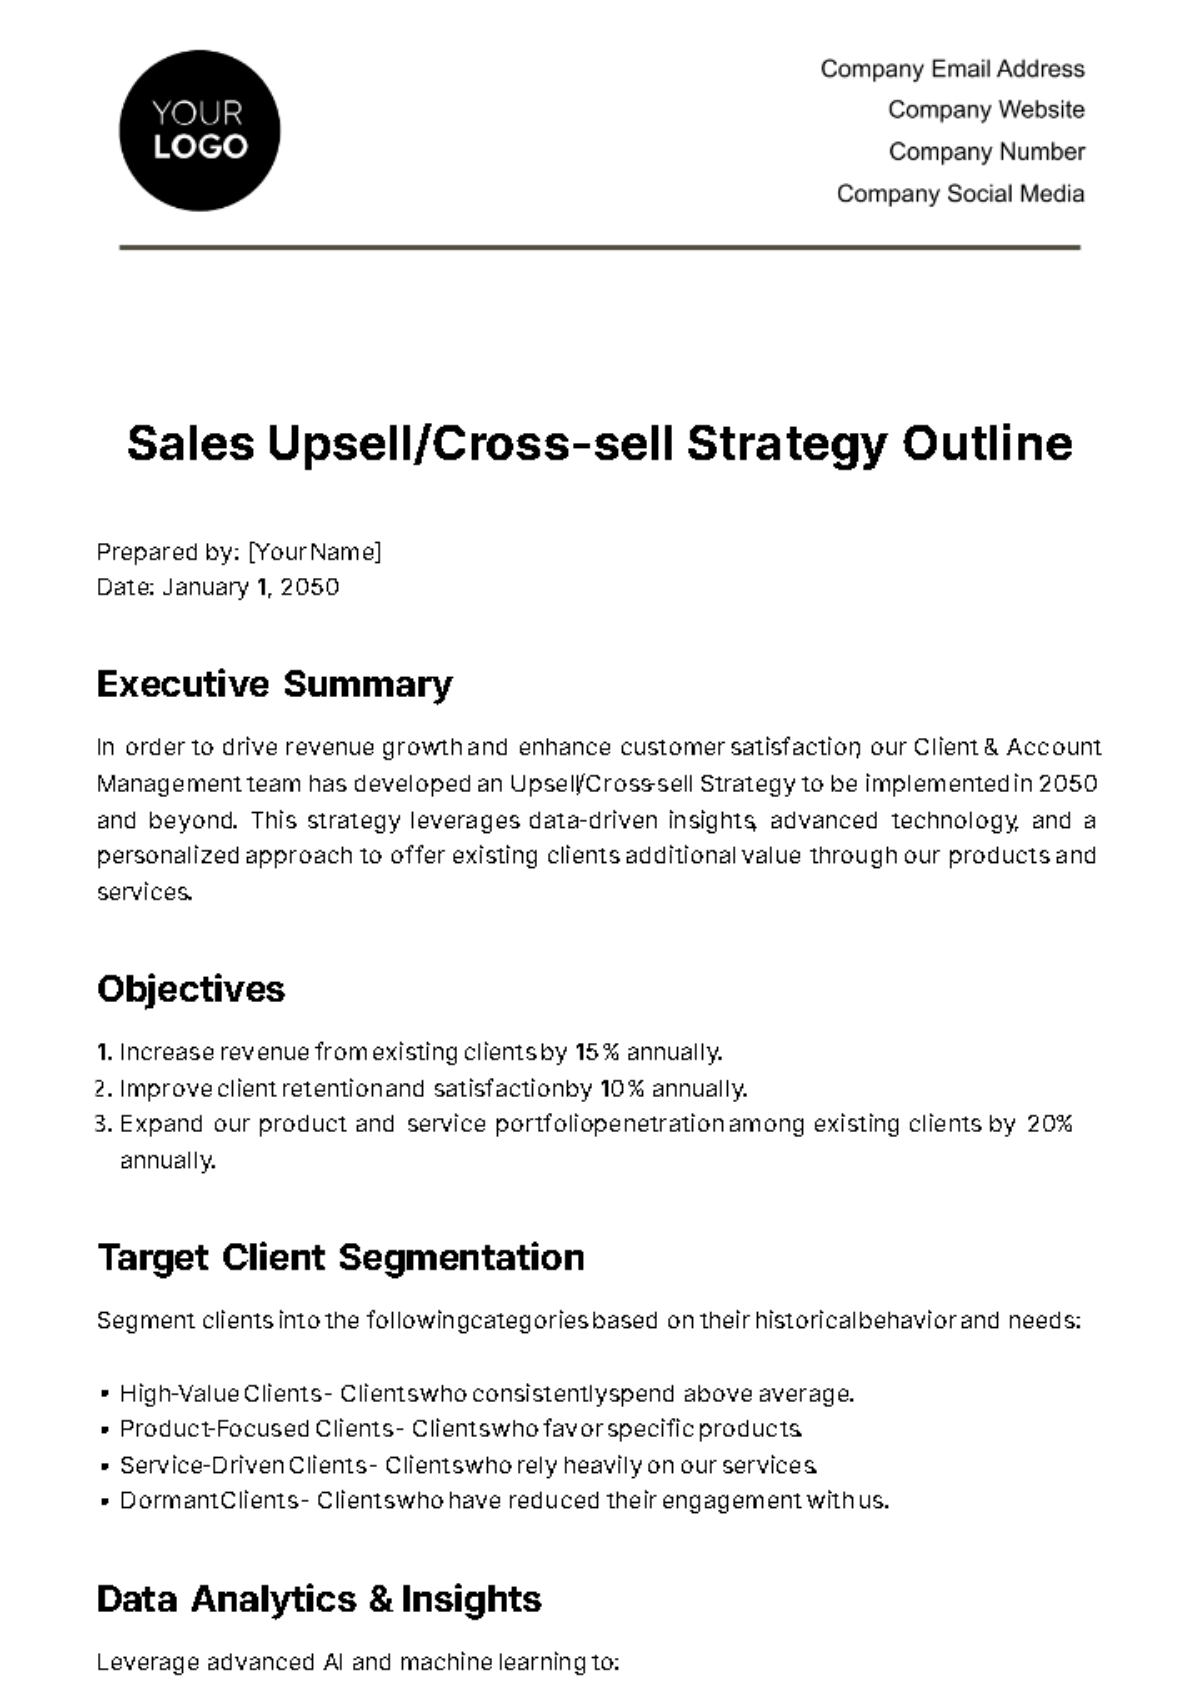 Sales Upsell/Cross-sell Strategy Outline Template